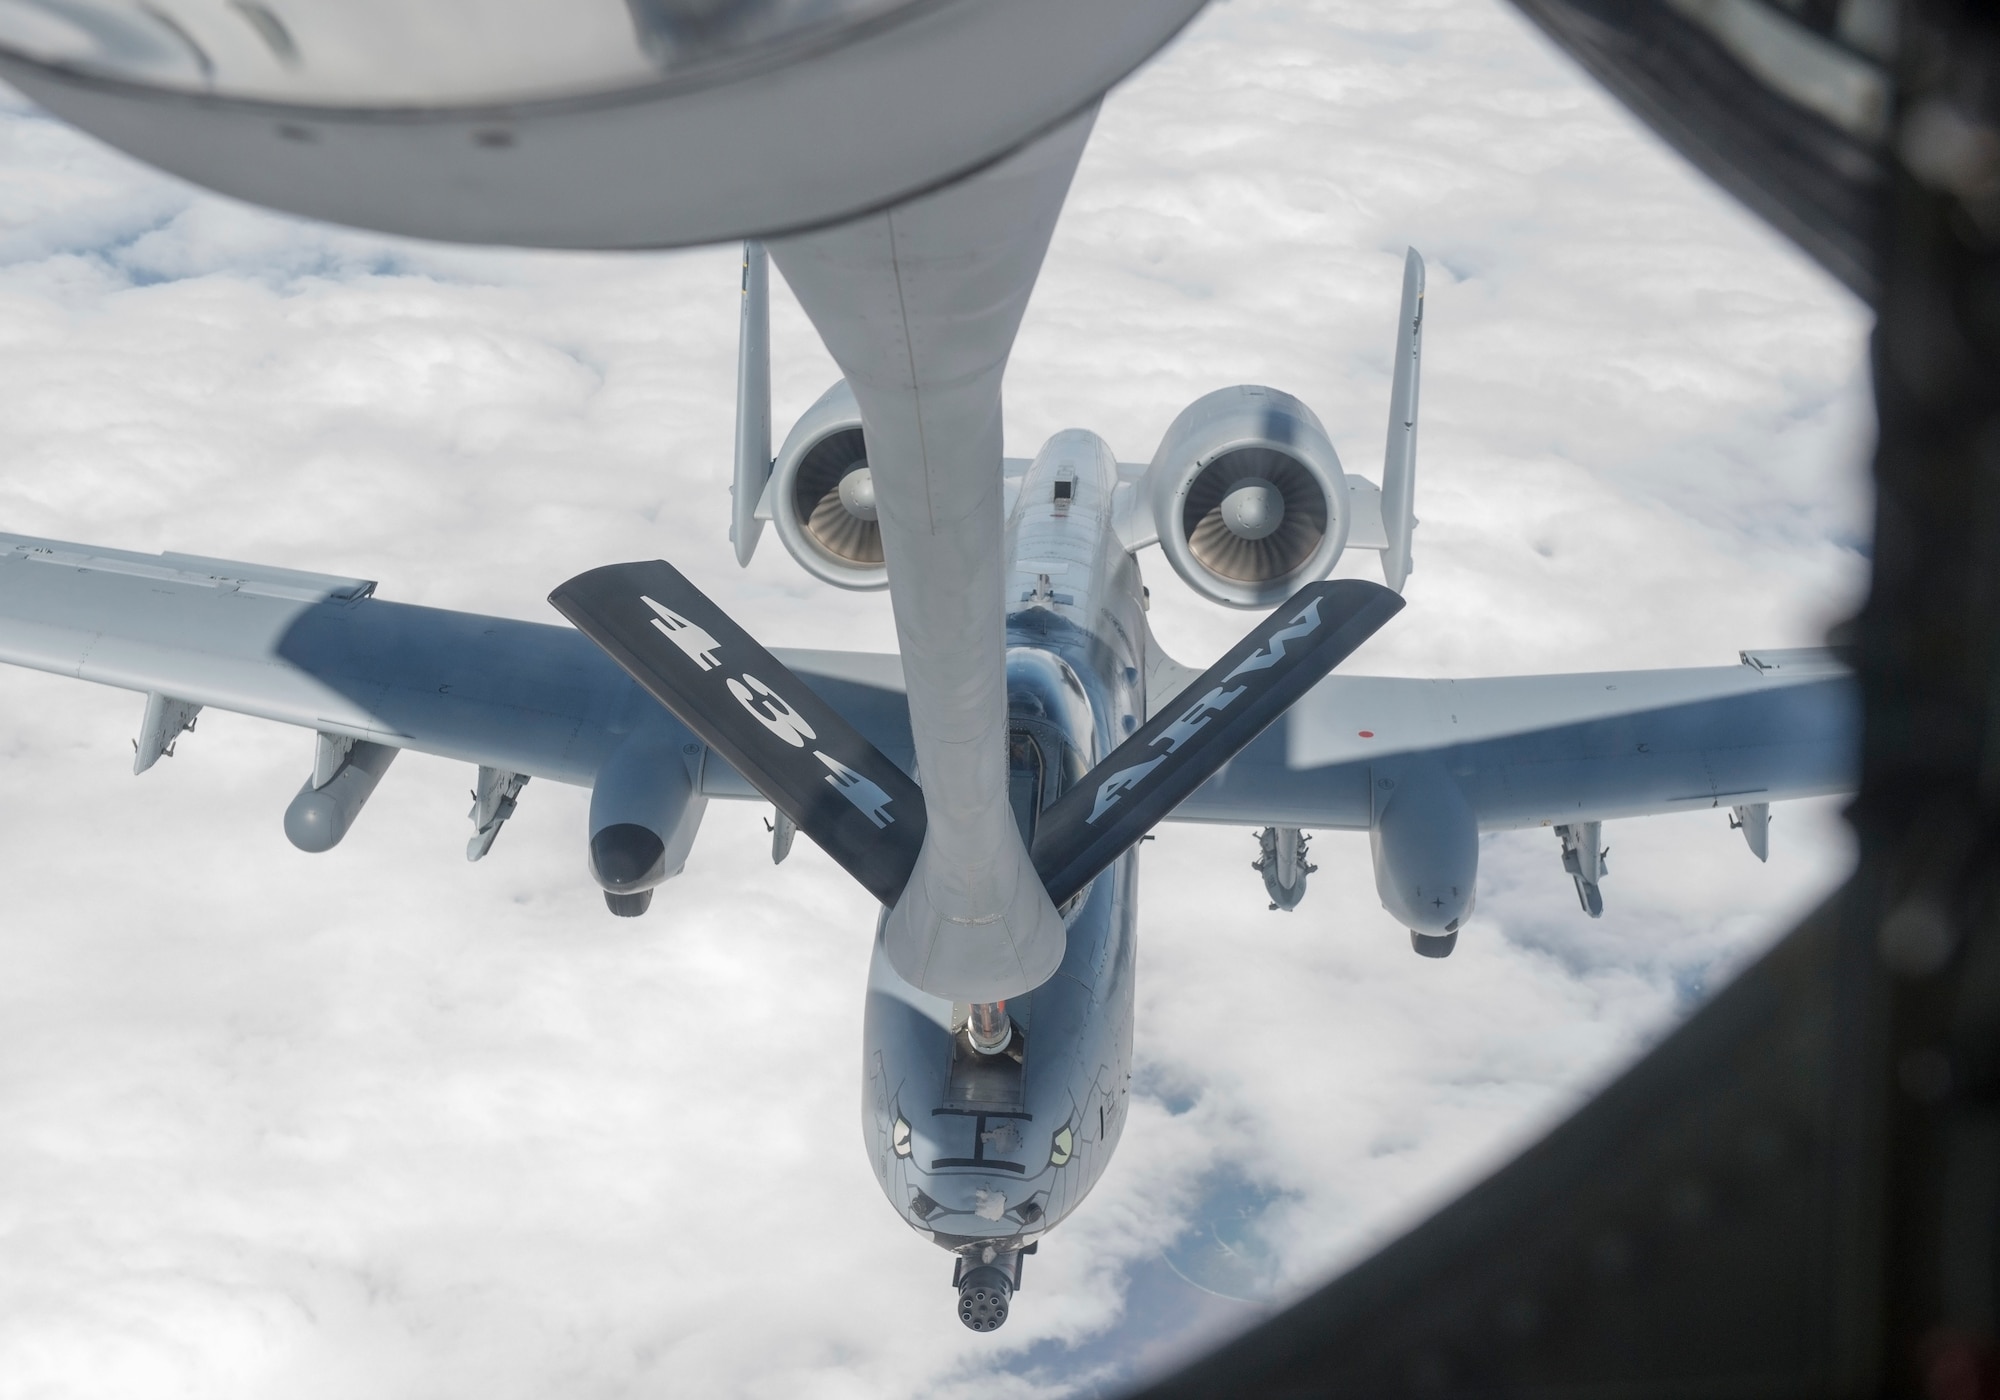 A 72nd Air Refueling Squadron inflight refueling technician, refuels an A-10 Warthog from the 122nd Fighter Wing, Fort Wayne, Ind., over the Midwest April 26, 2019. Forty-two employers, nominated by Guard and Reserve members from the 434th ARW, the 122th Fighter Wing in Fort Wayne, Ind., and the 181st Intelligence Wing in Terre Haute Ind., had a hands-on tour of the base that concluded with an air refueling mission. (U.S. Air Force photo/Tech Sgt. Jami K. Lancette)